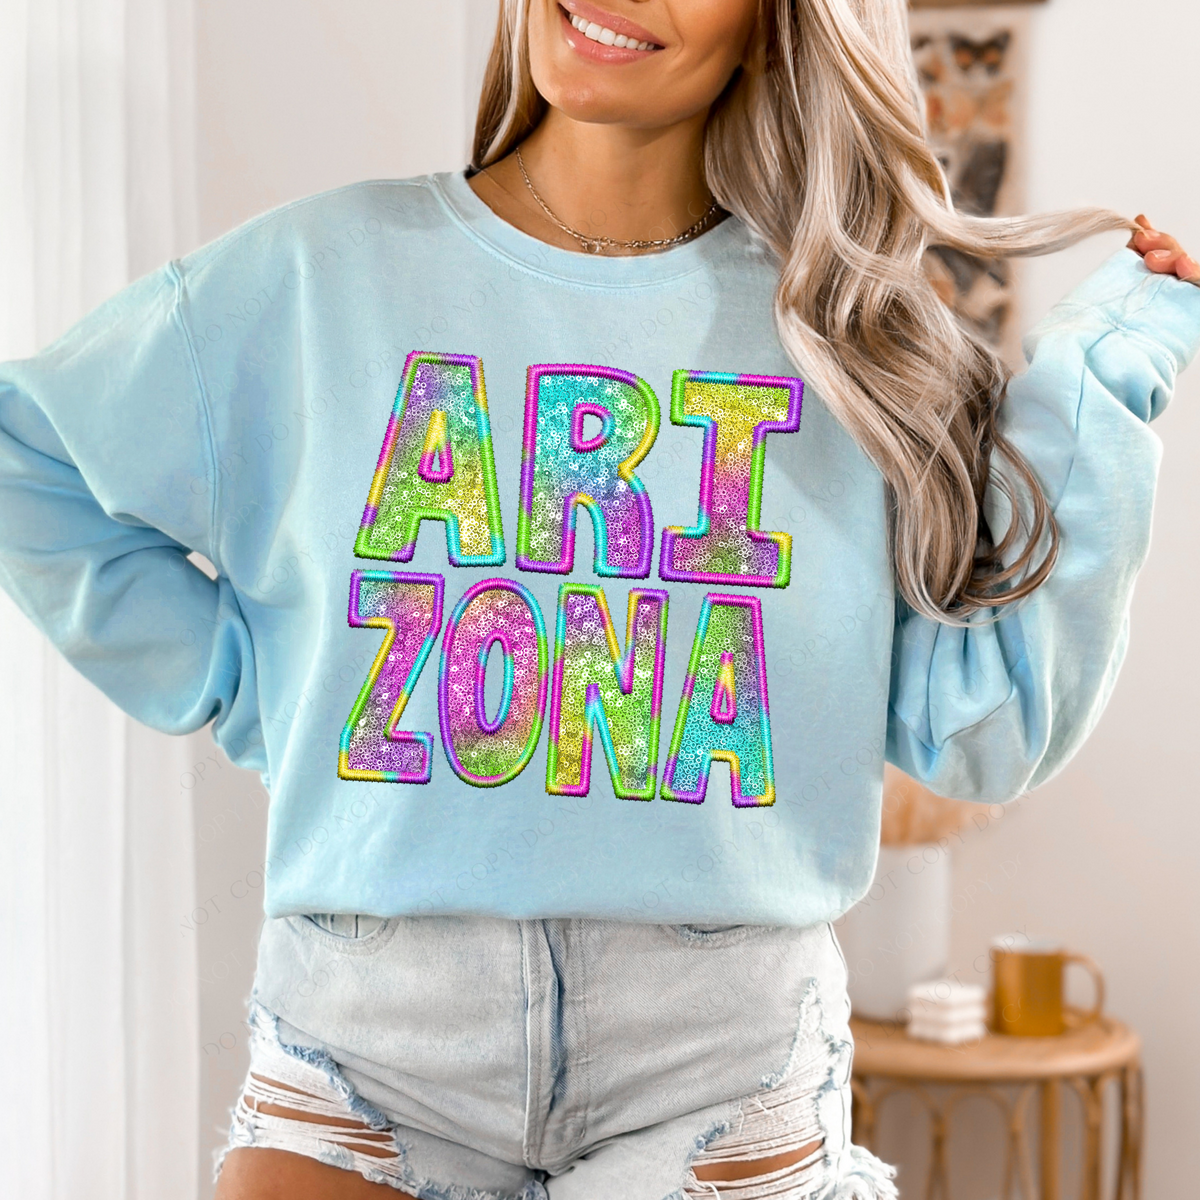 Arizona Faux Embroidery & Sequin in Colorful Fun Tie Dye Digital Download, PNG